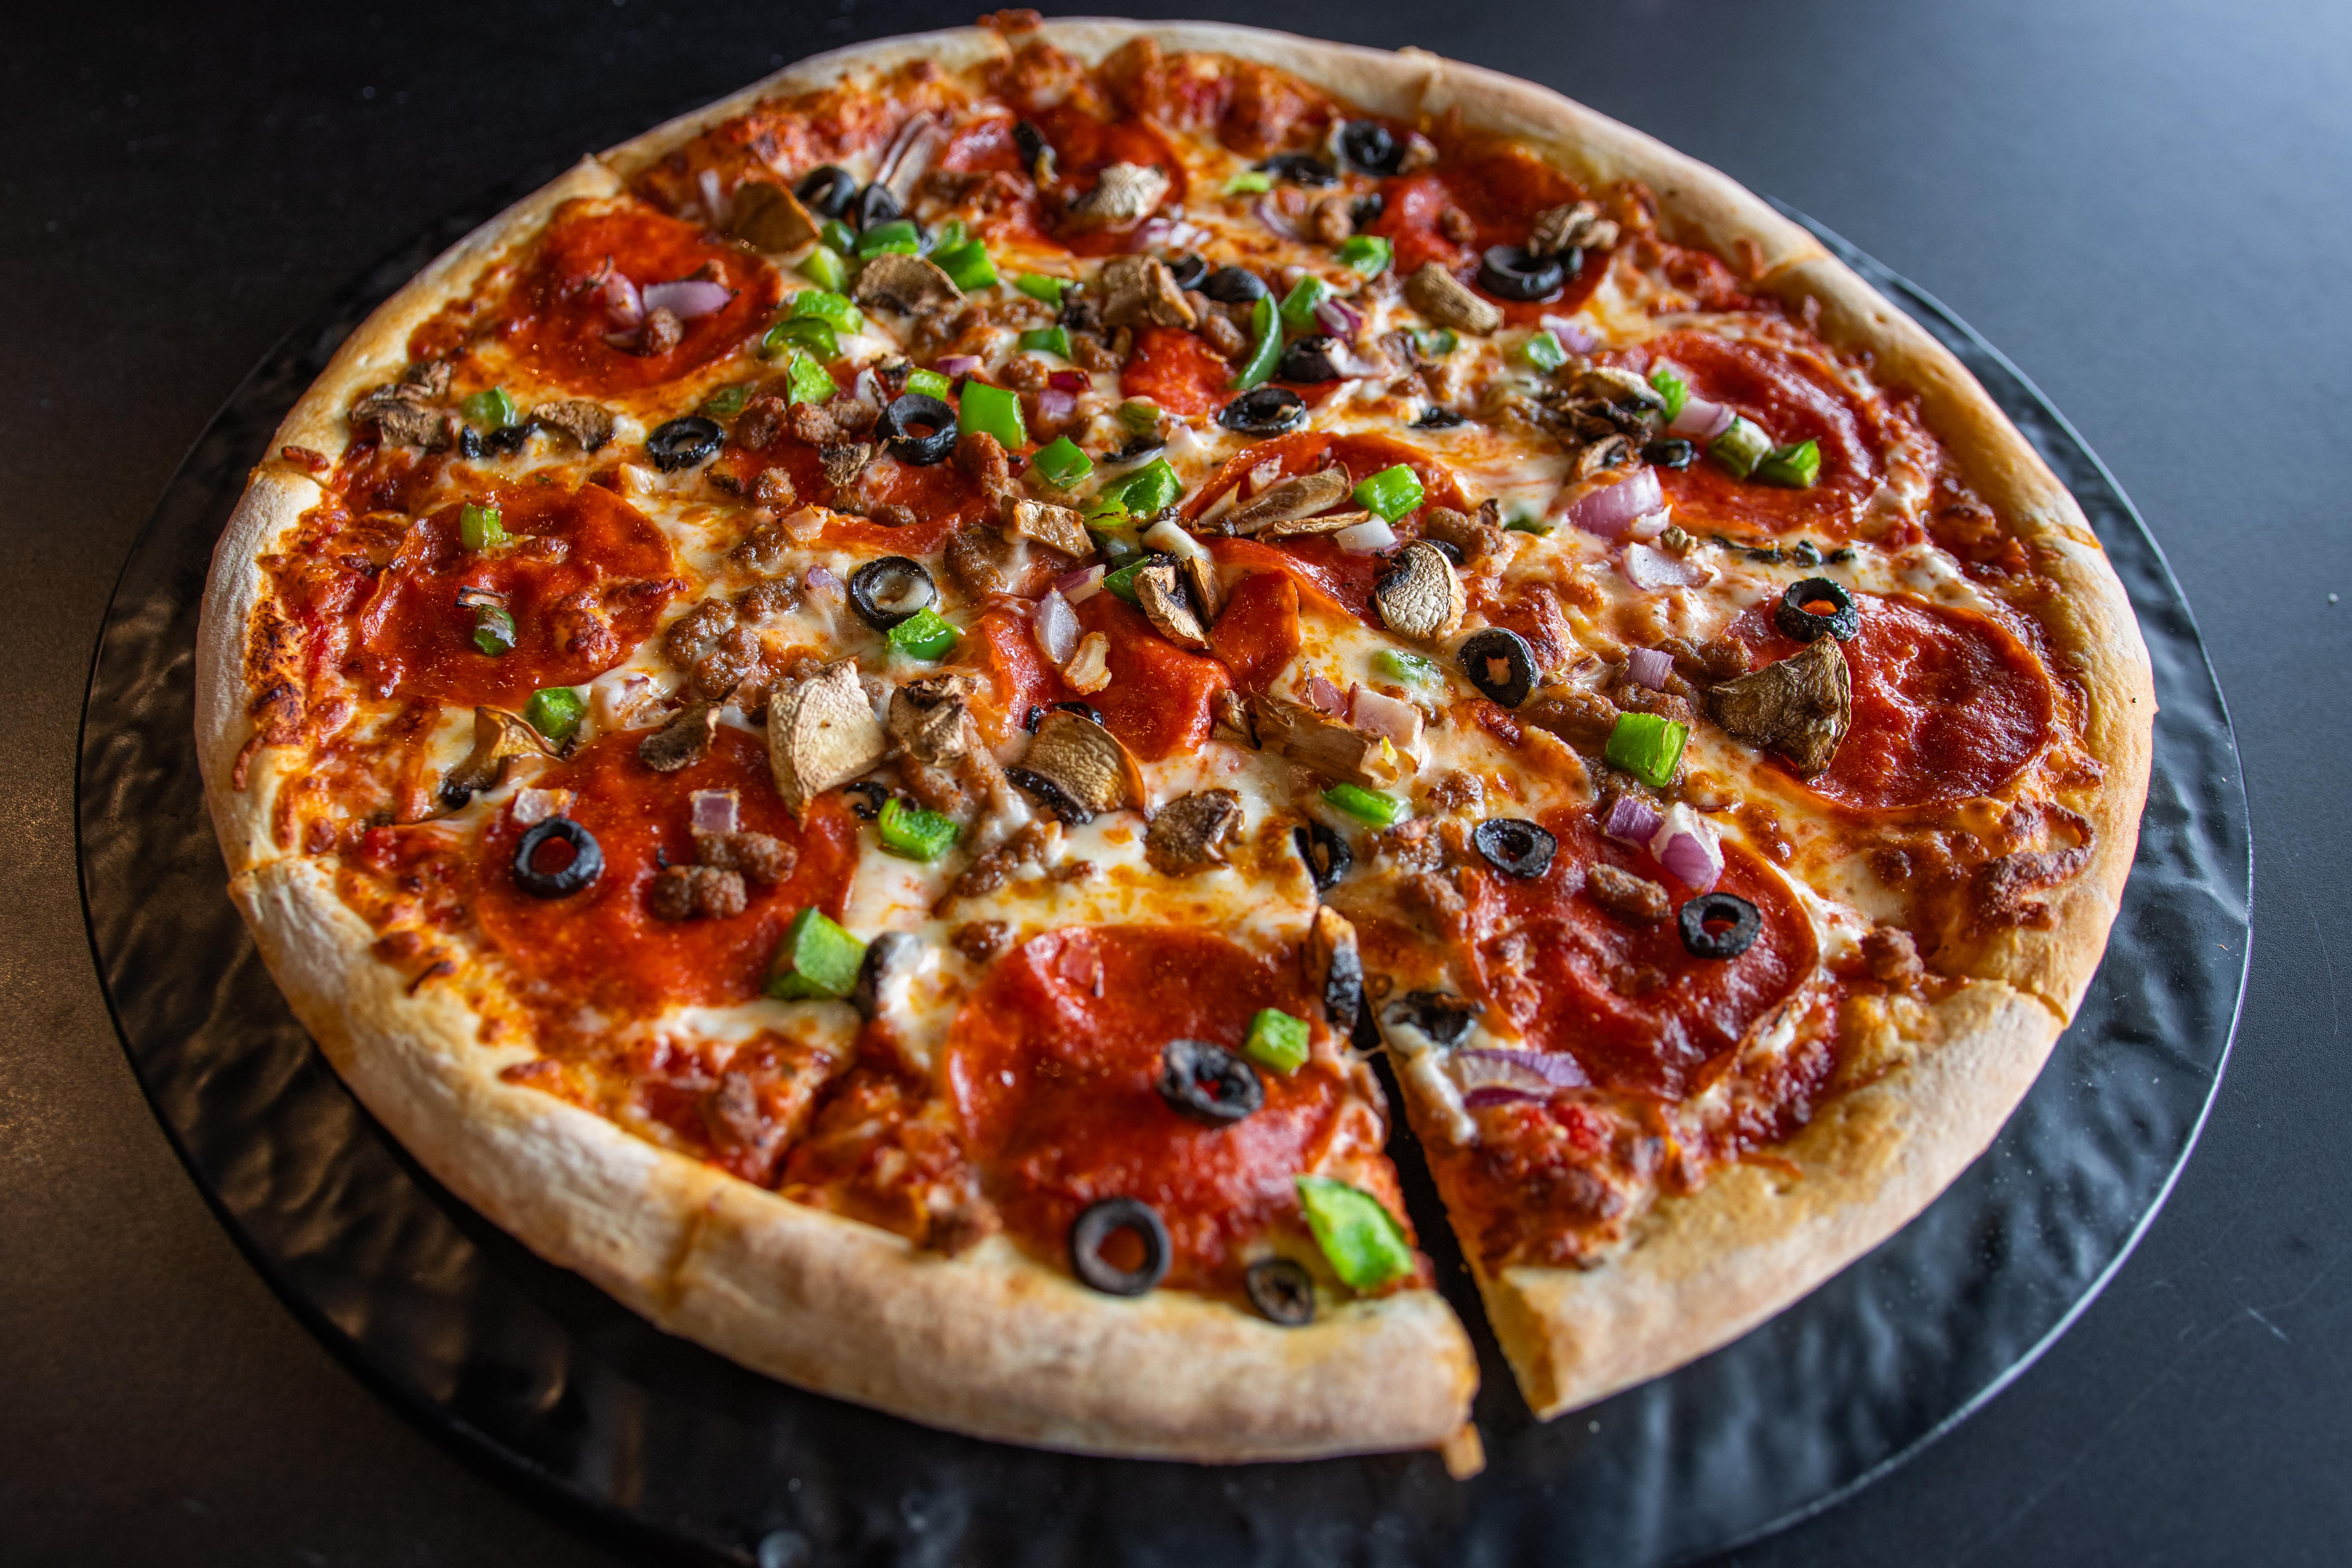 What are The Most Popular Types of Pizza?